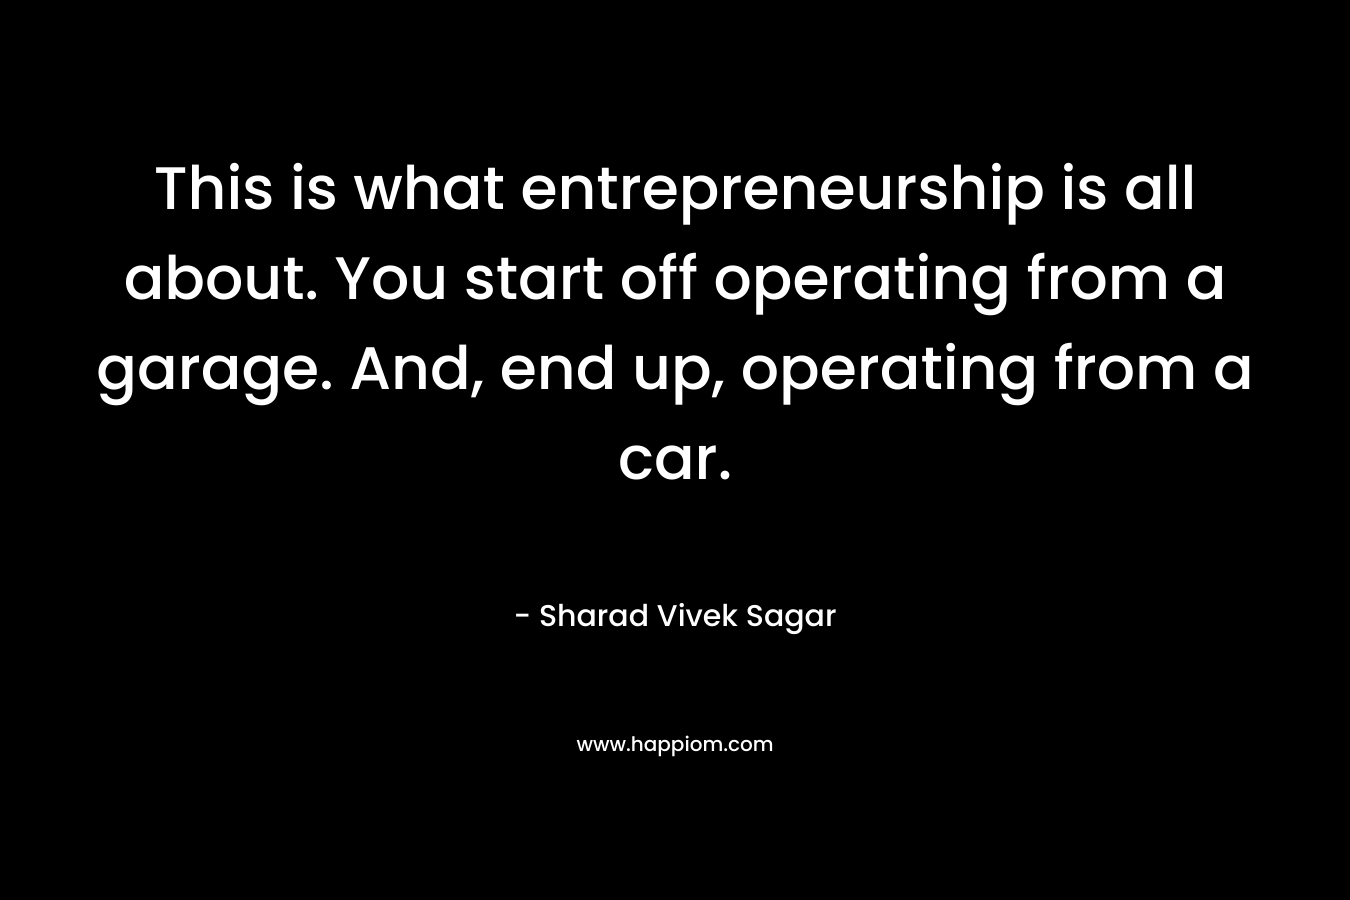 This is what entrepreneurship is all about. You start off operating from a garage. And, end up, operating from a car. – Sharad Vivek Sagar